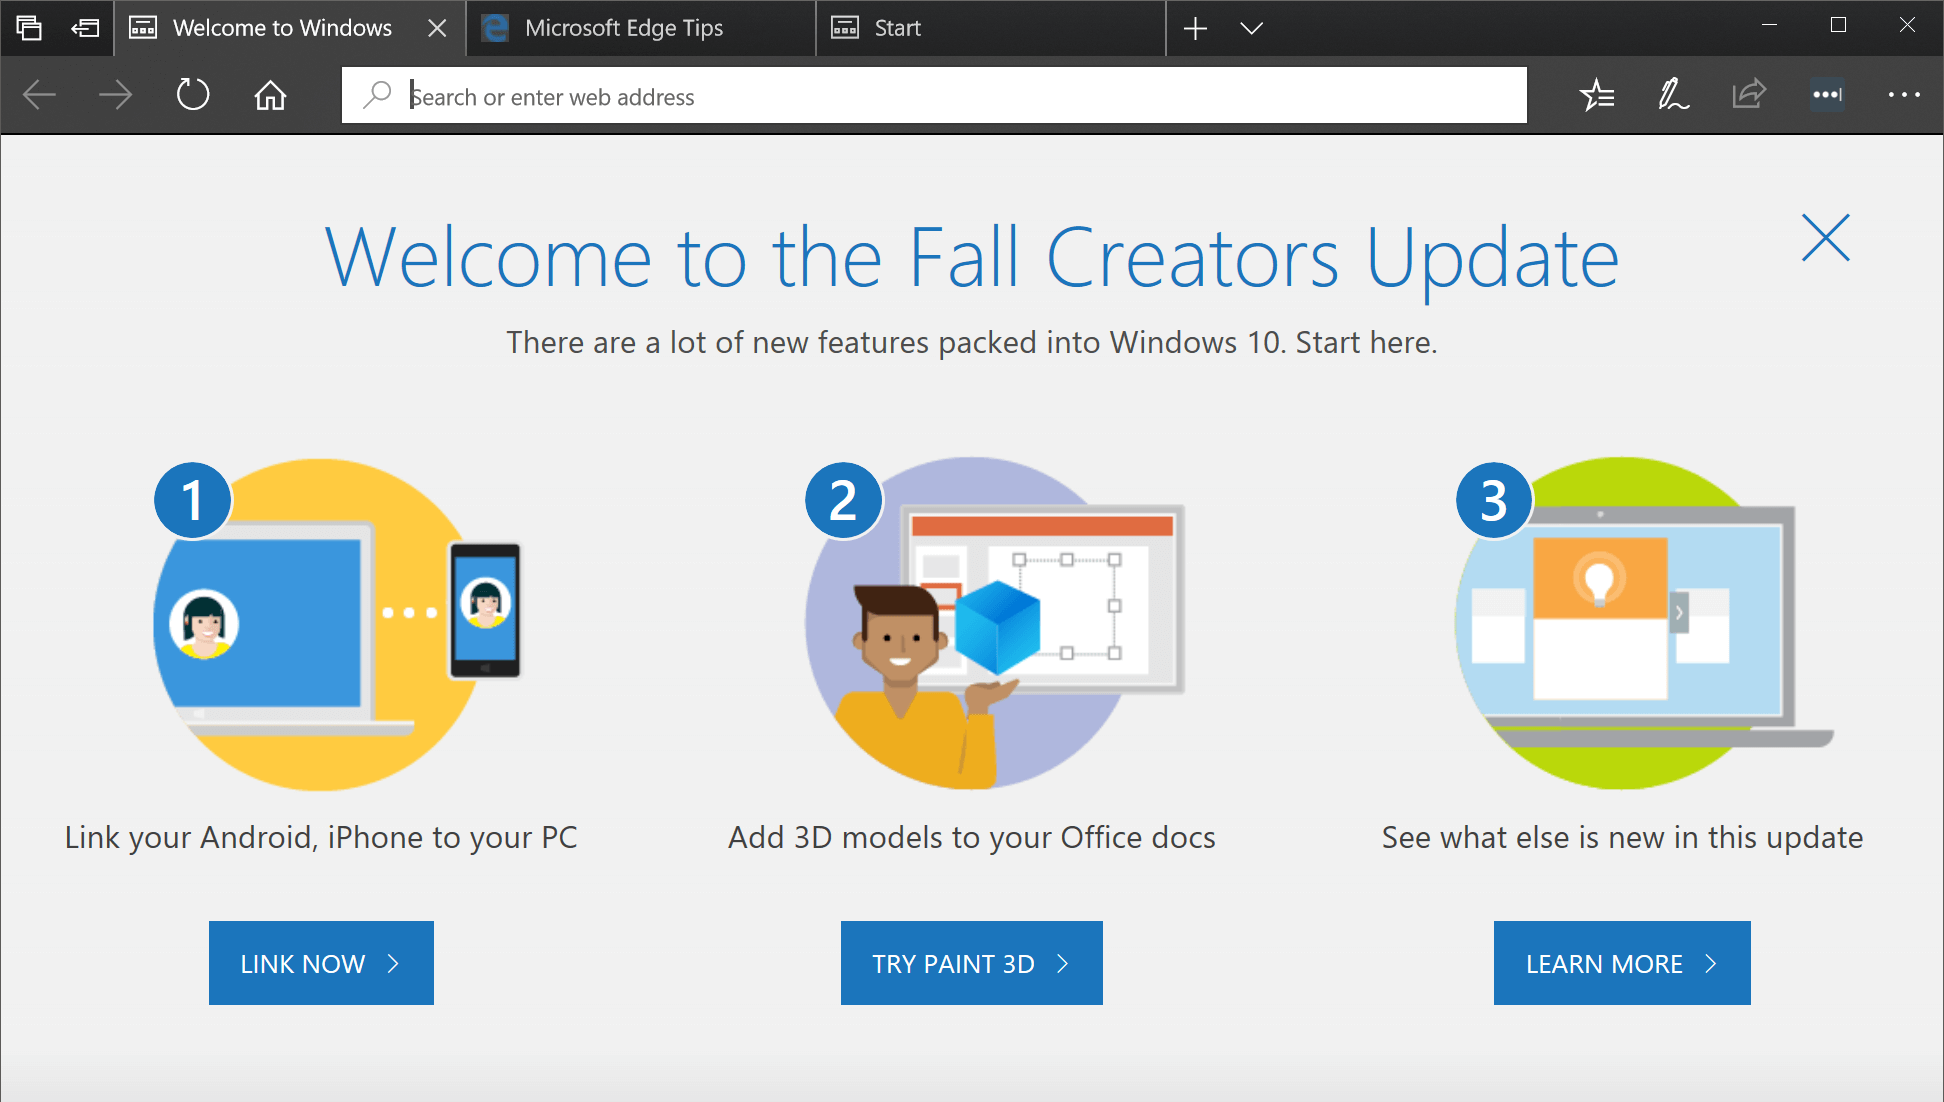 Windows 10 Fall Creators Update is now available: A collection of many small and medium-sized improvements